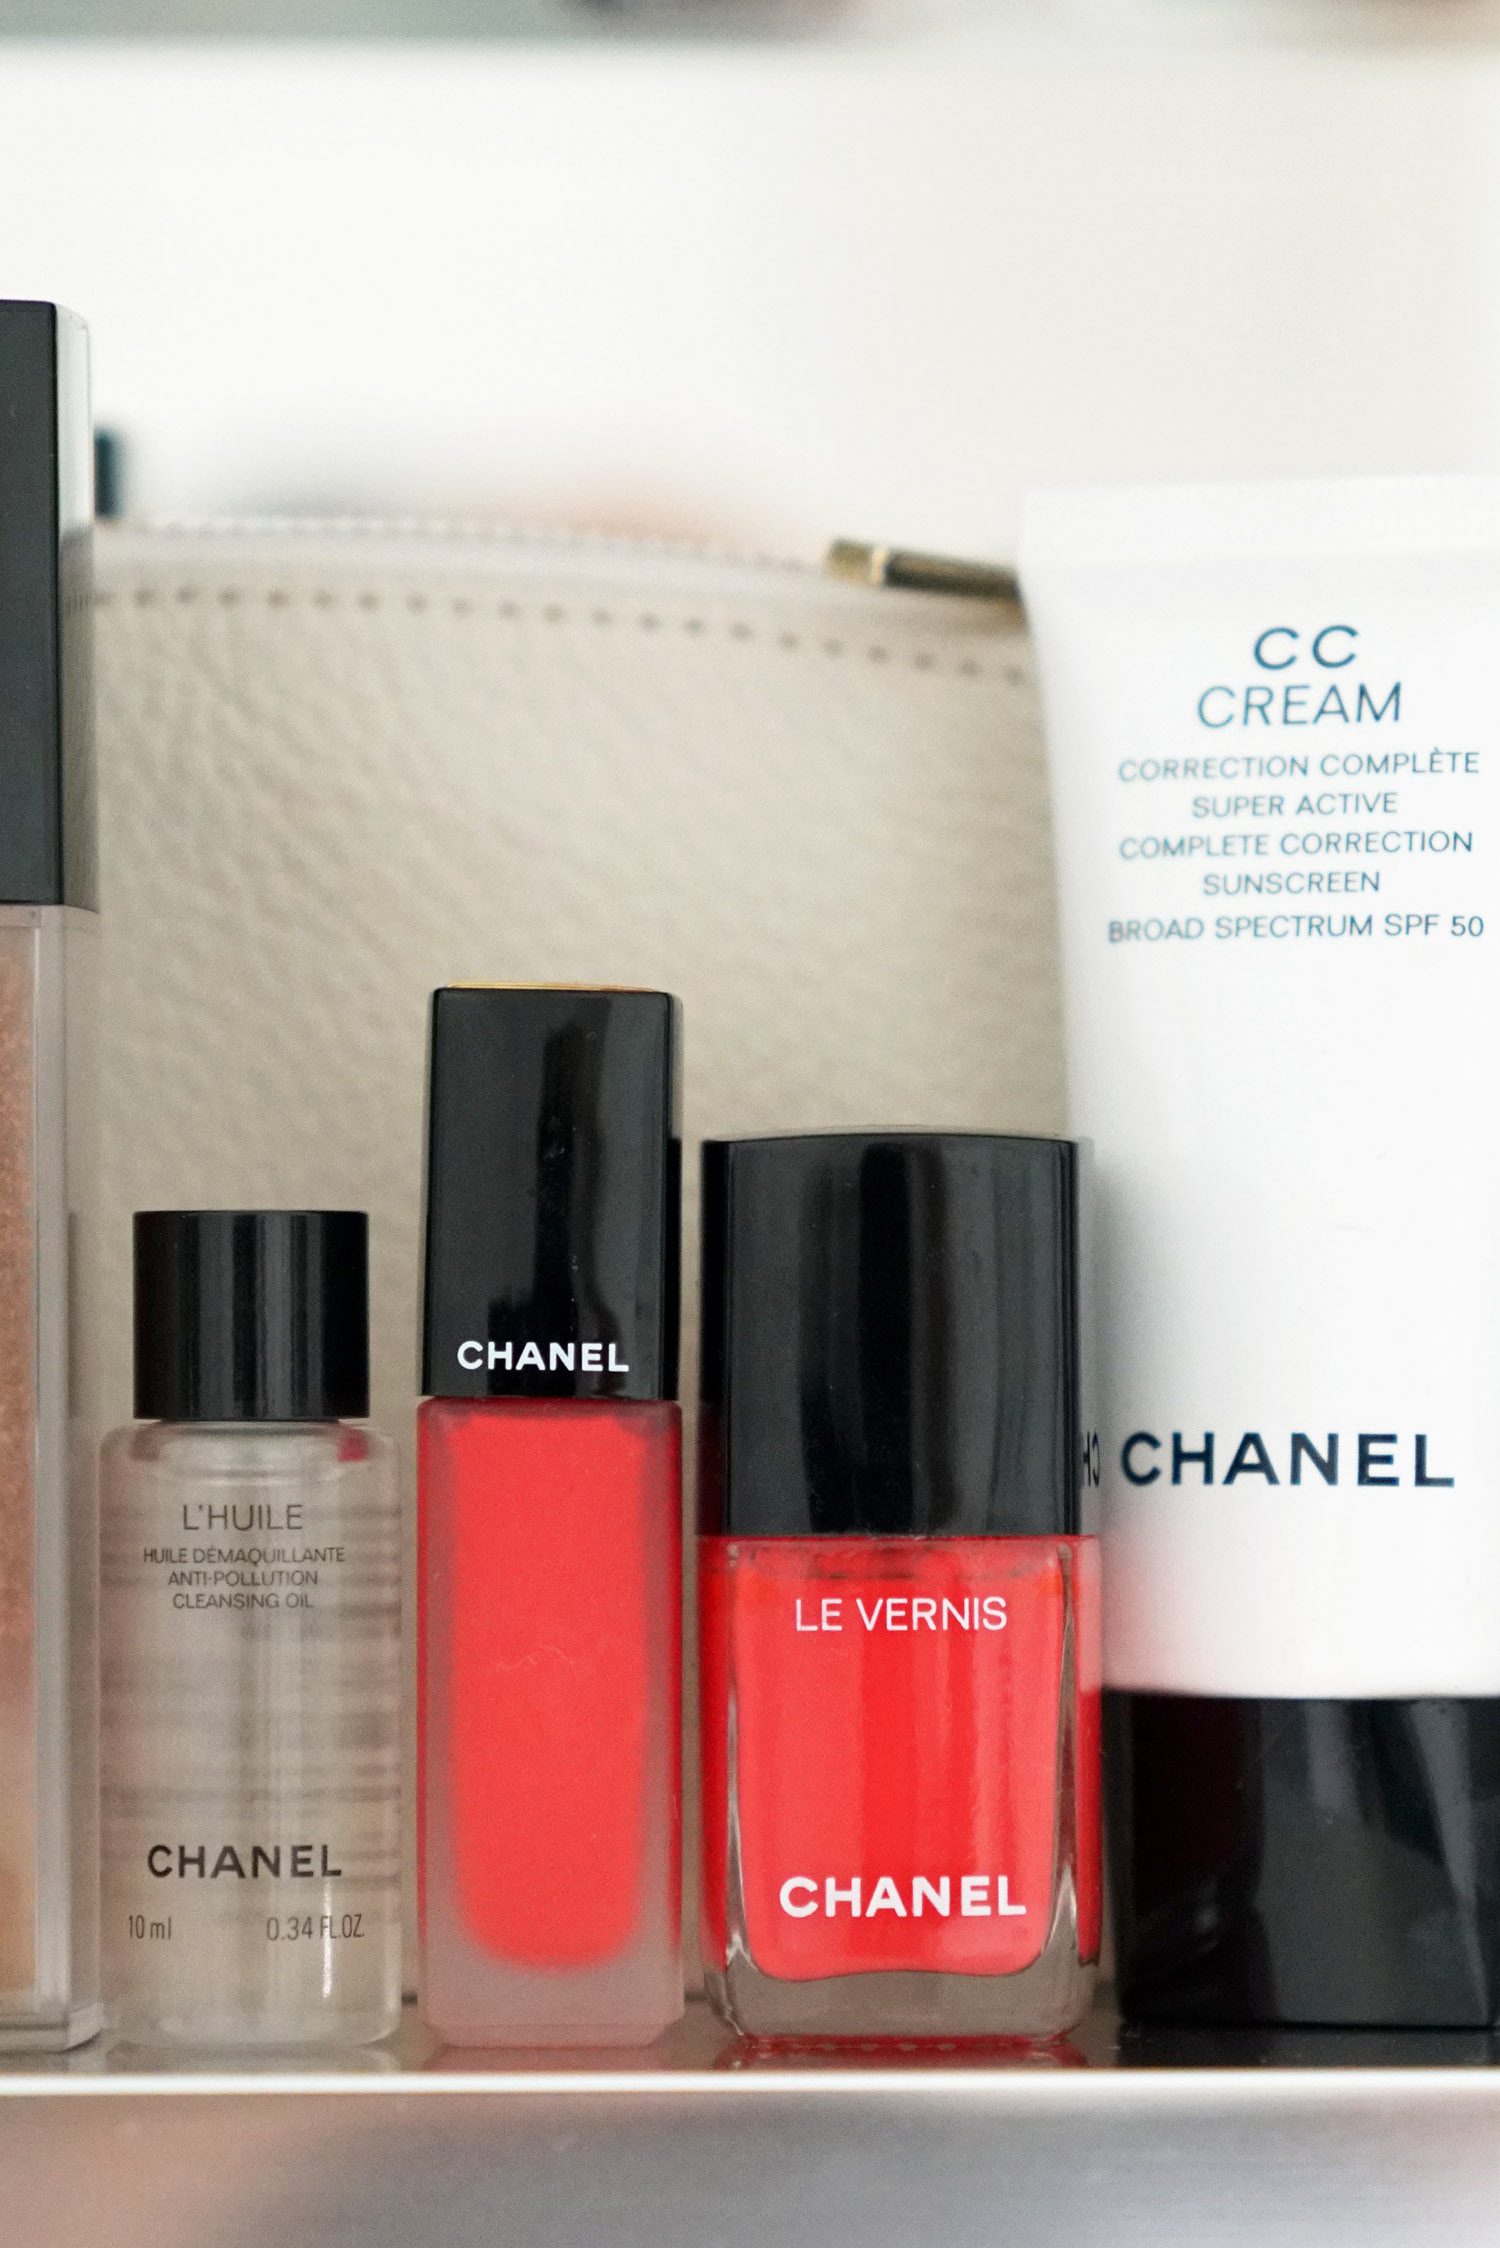 Top 10 Chanel Le Vernis Nail Shades + Lip Colors to Match - The